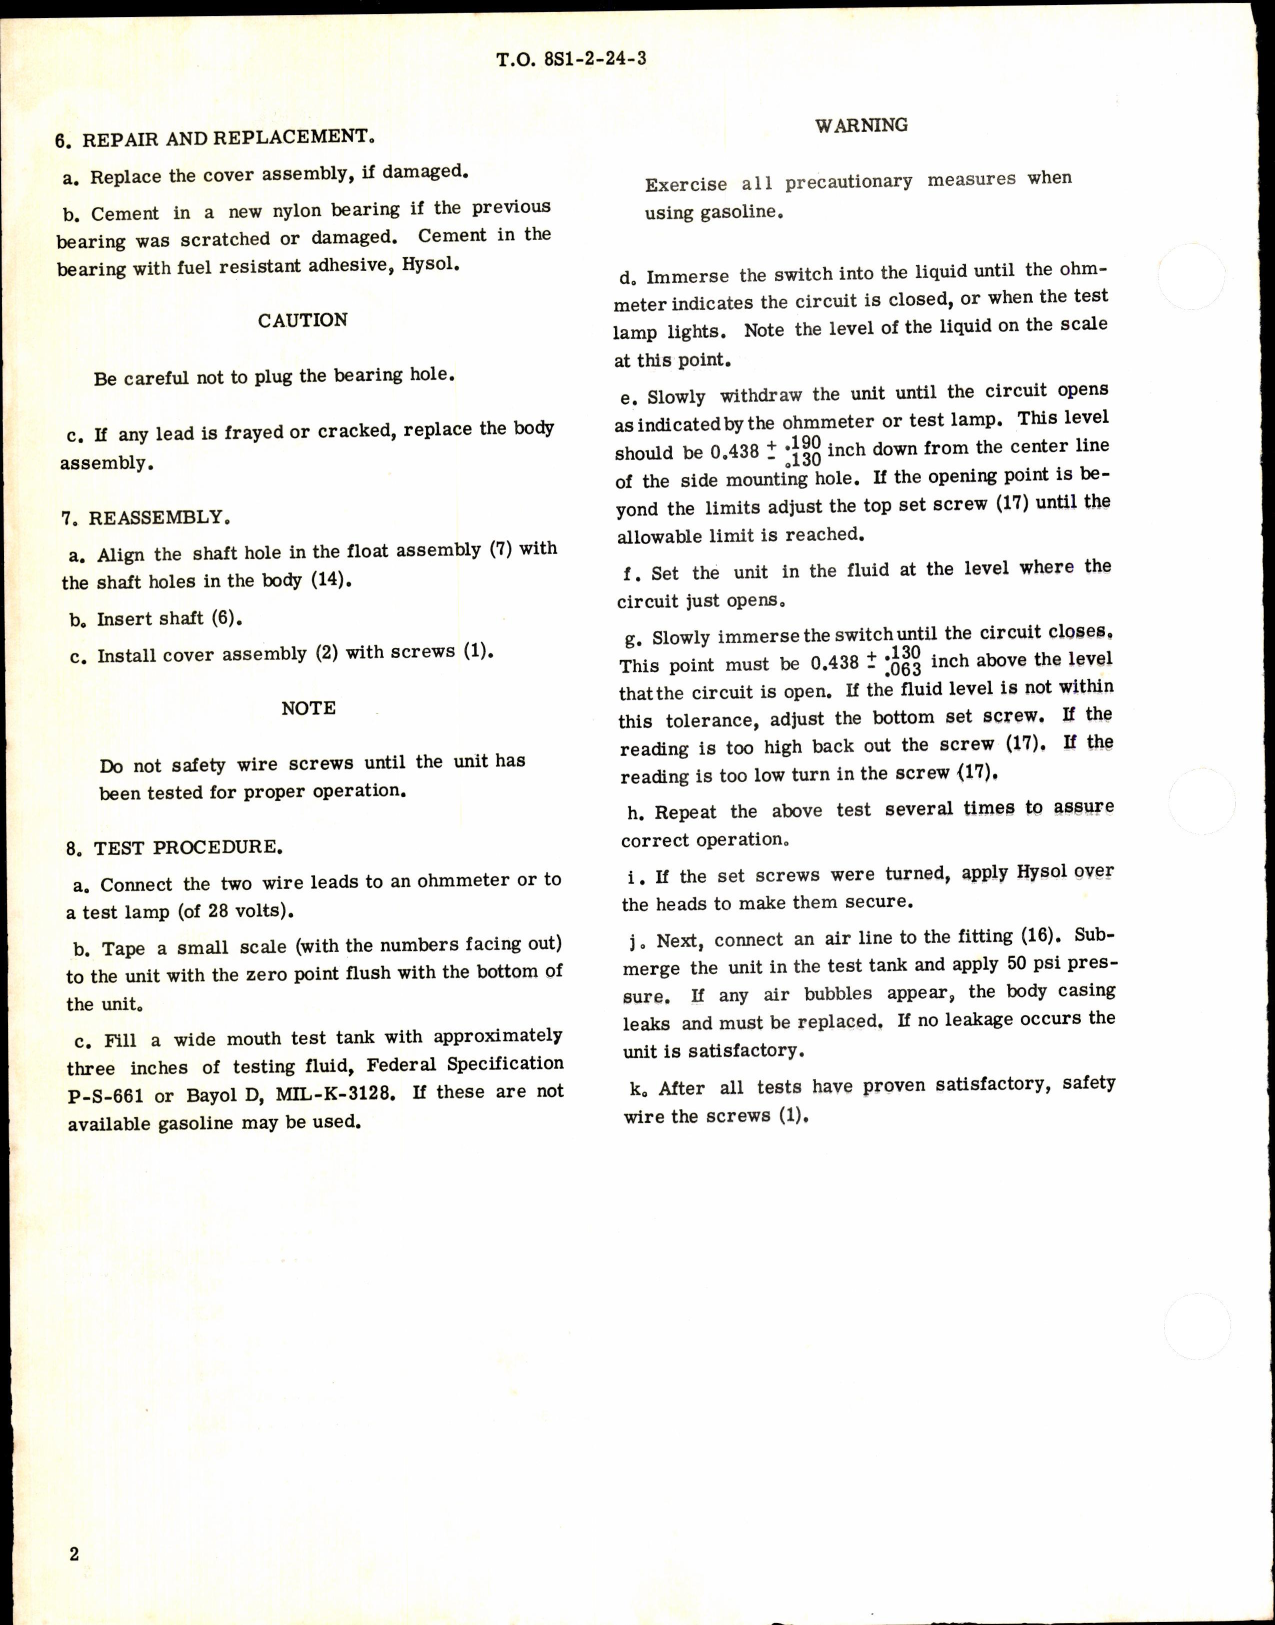 Sample page 2 from AirCorps Library document: Switch Assembly, Fuel Float F-7860